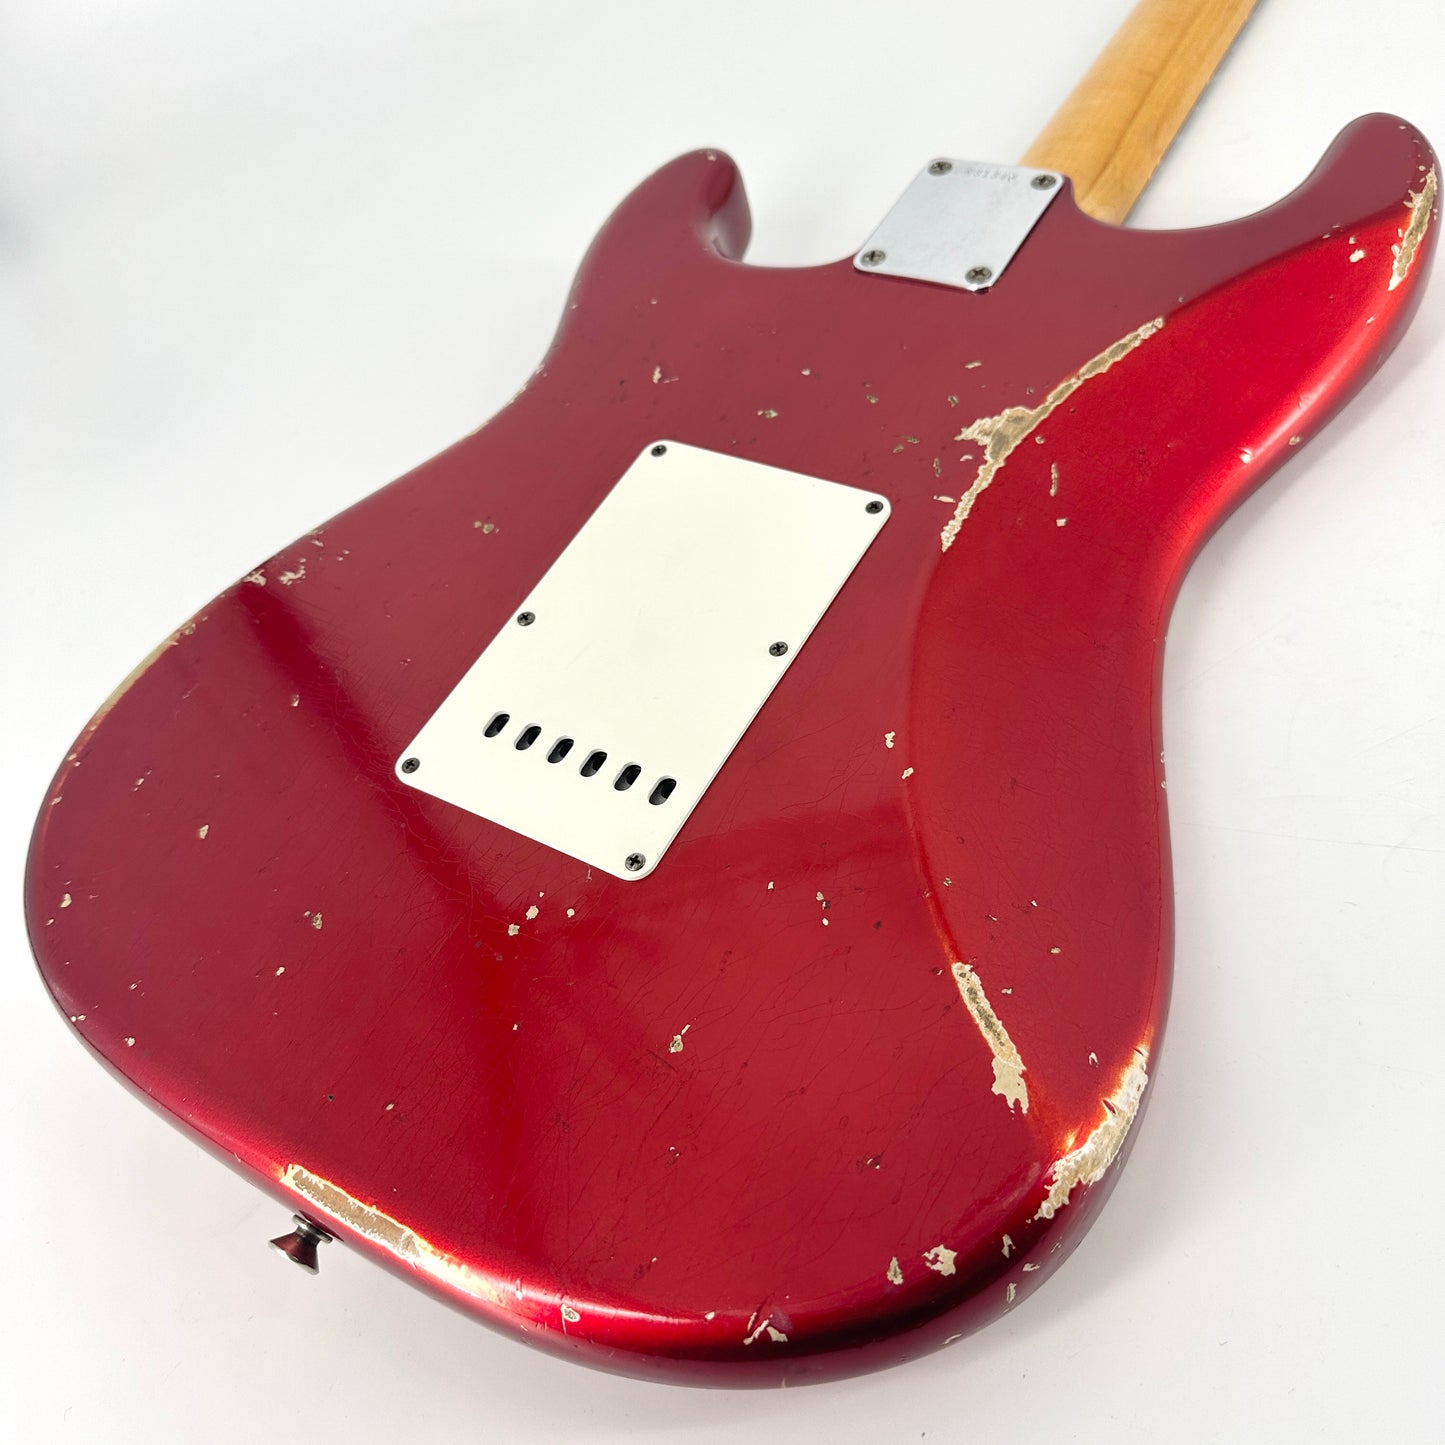 2015 Fender Custom Shop '63 Stratocaster Relic - Candy Apple Red